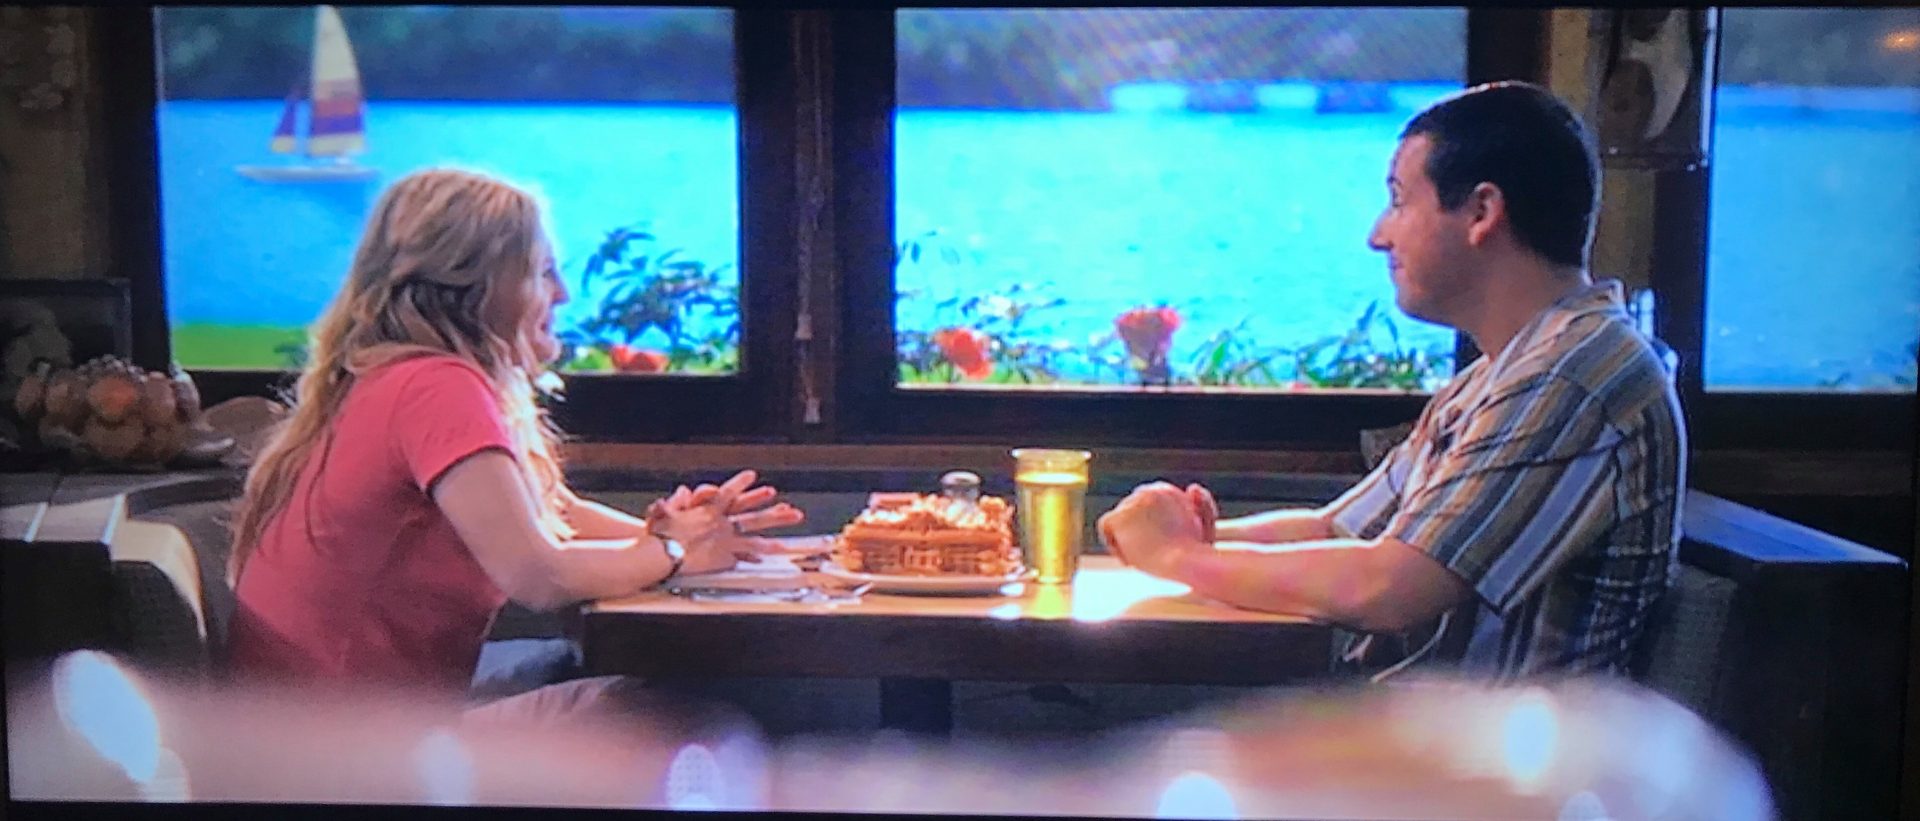 A scene from 50 first dates where a man and woman are sat in a restaurant across the table from each other with a large fishtank in the background